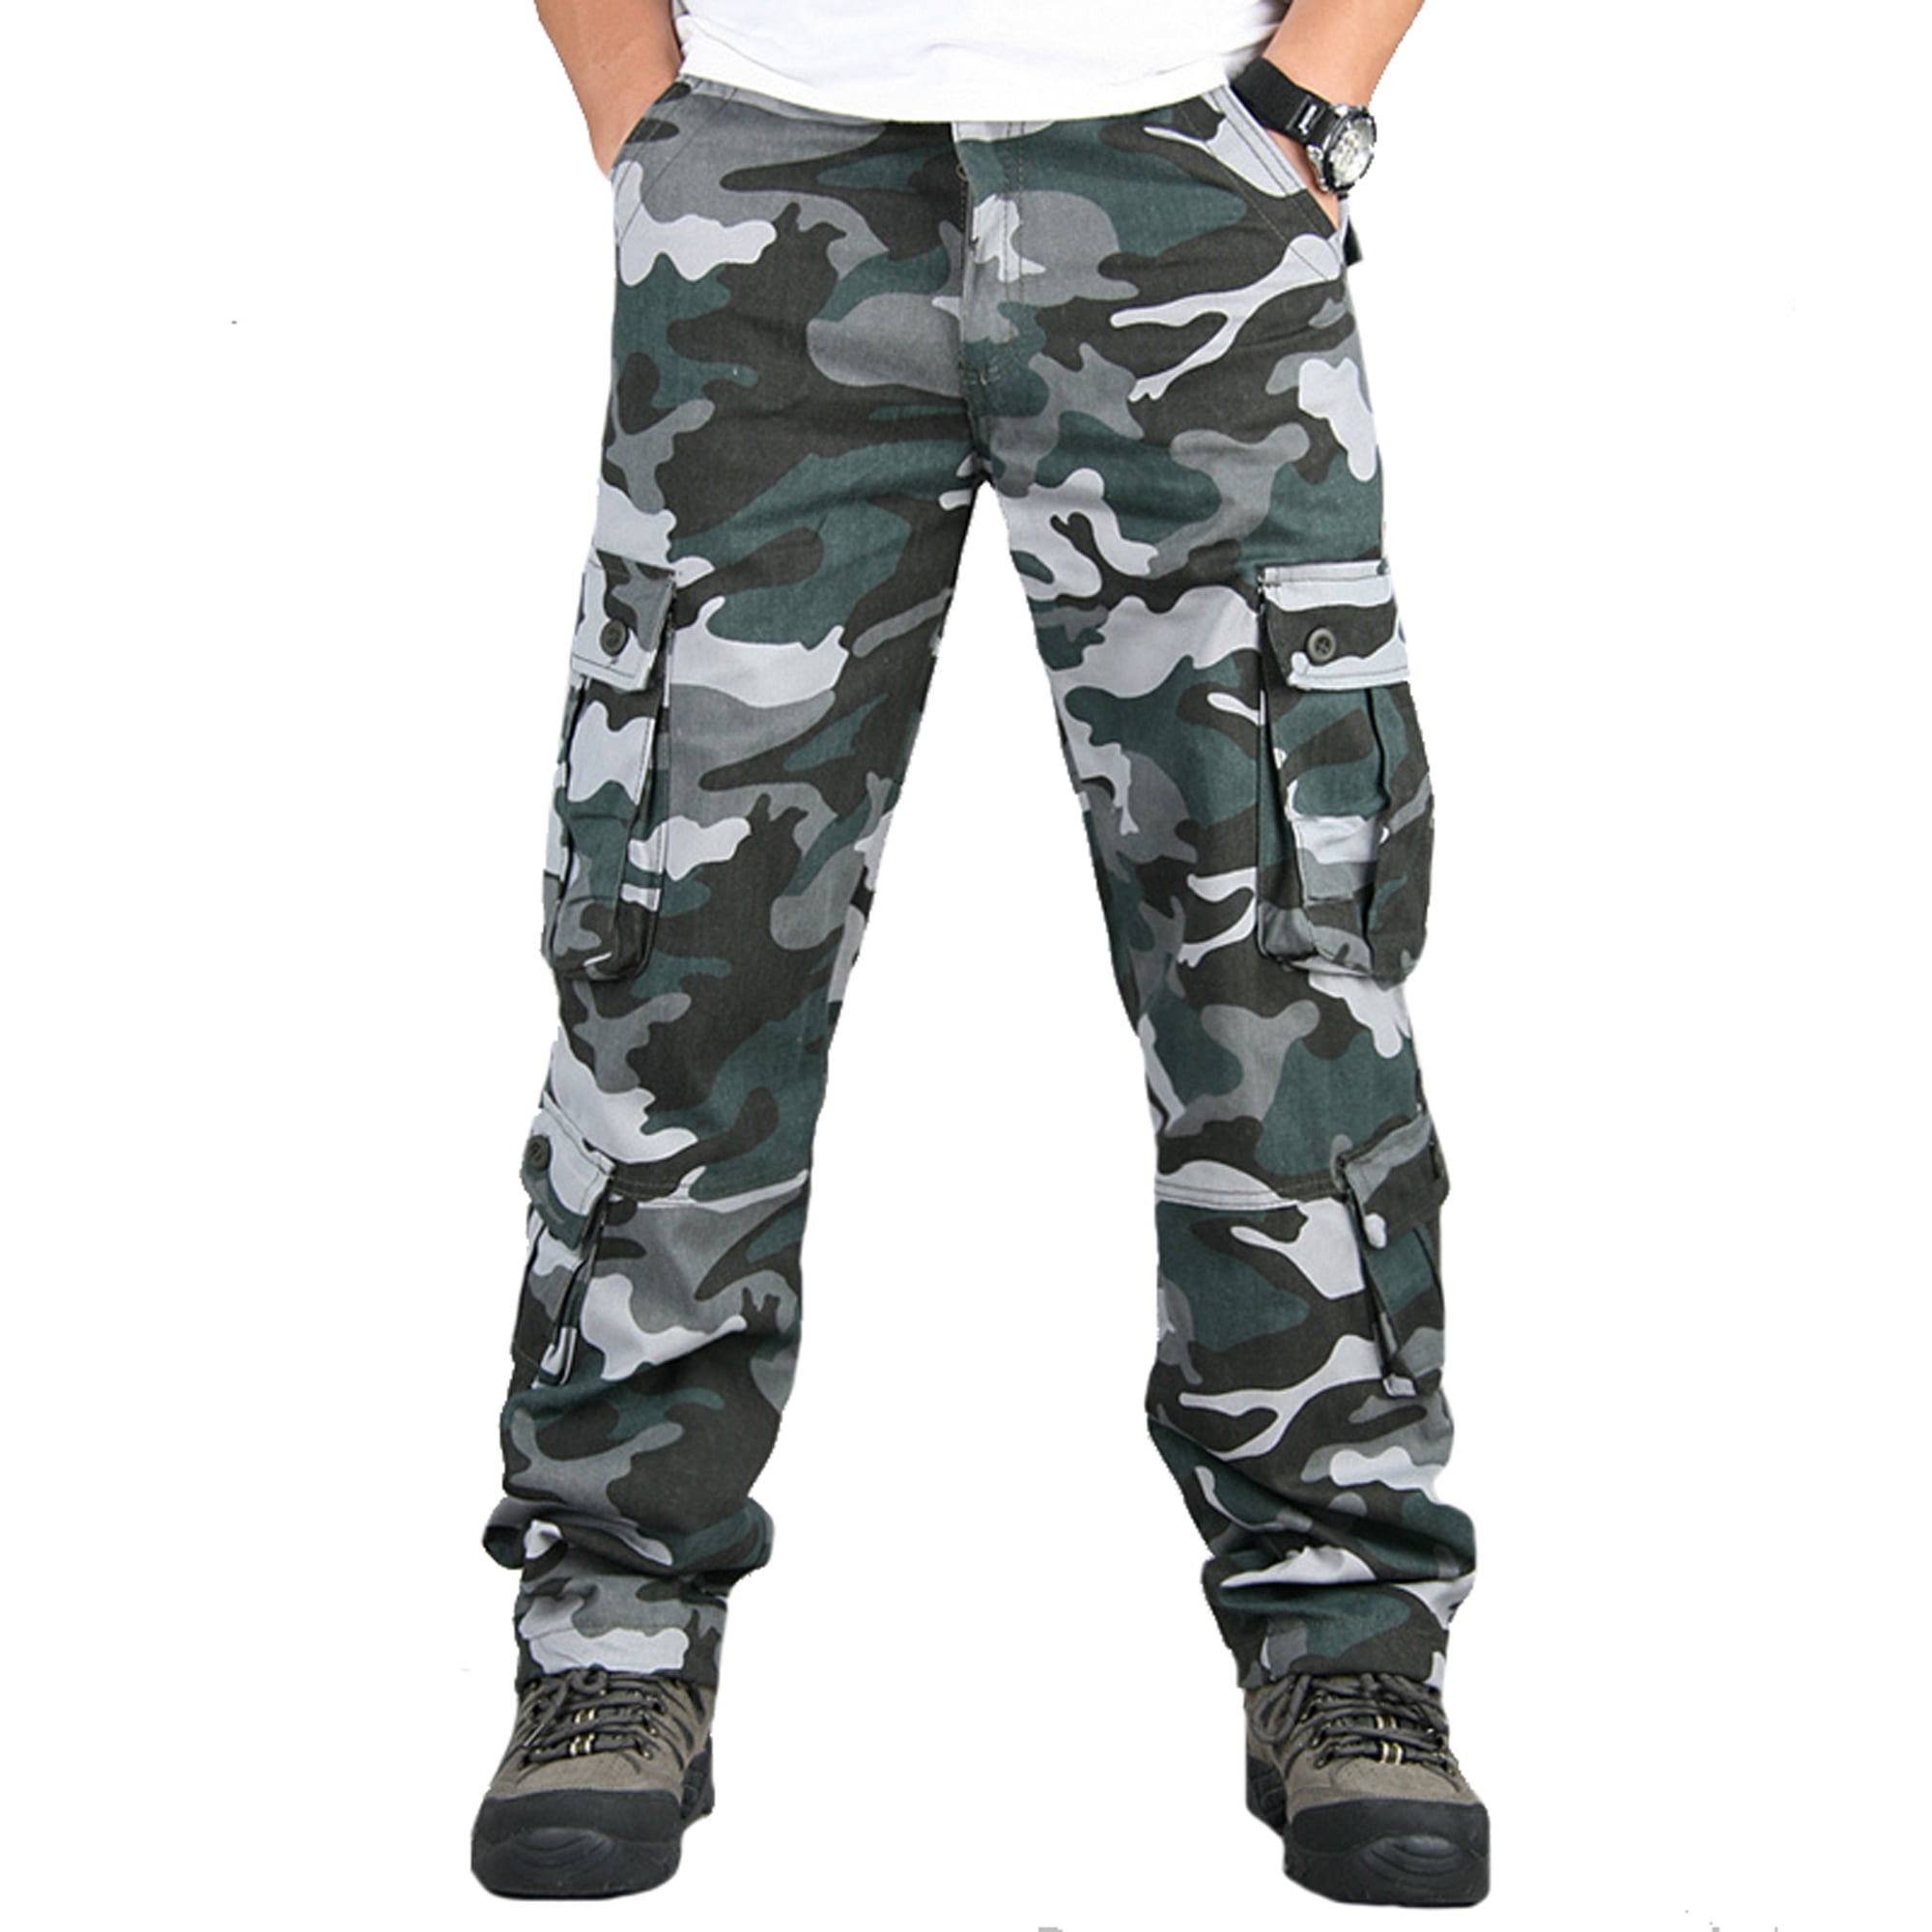 Mens Military Combat Trousers Camouflage Printed Cargo Army Casual Work ...